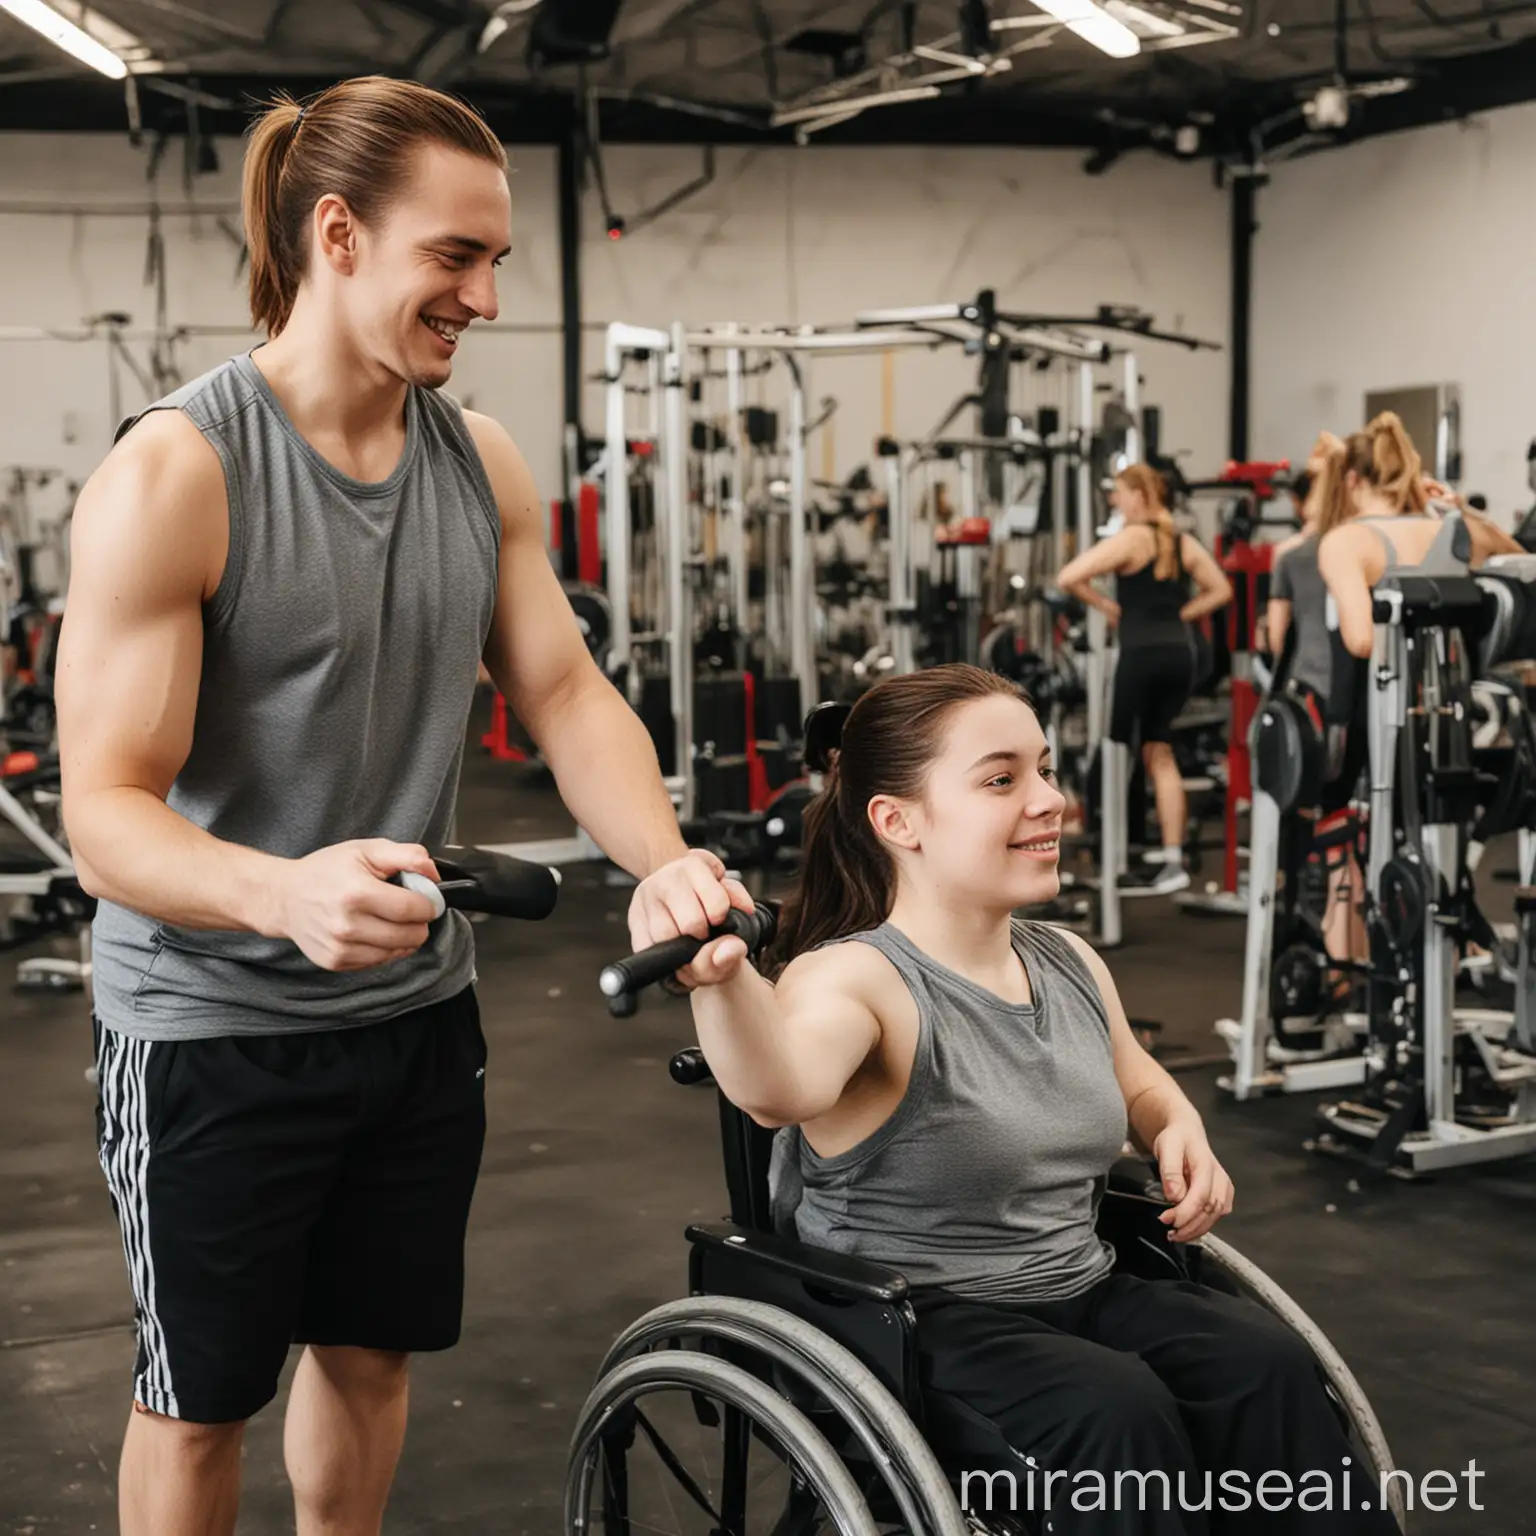 Training in the Gym for People with Disabilities